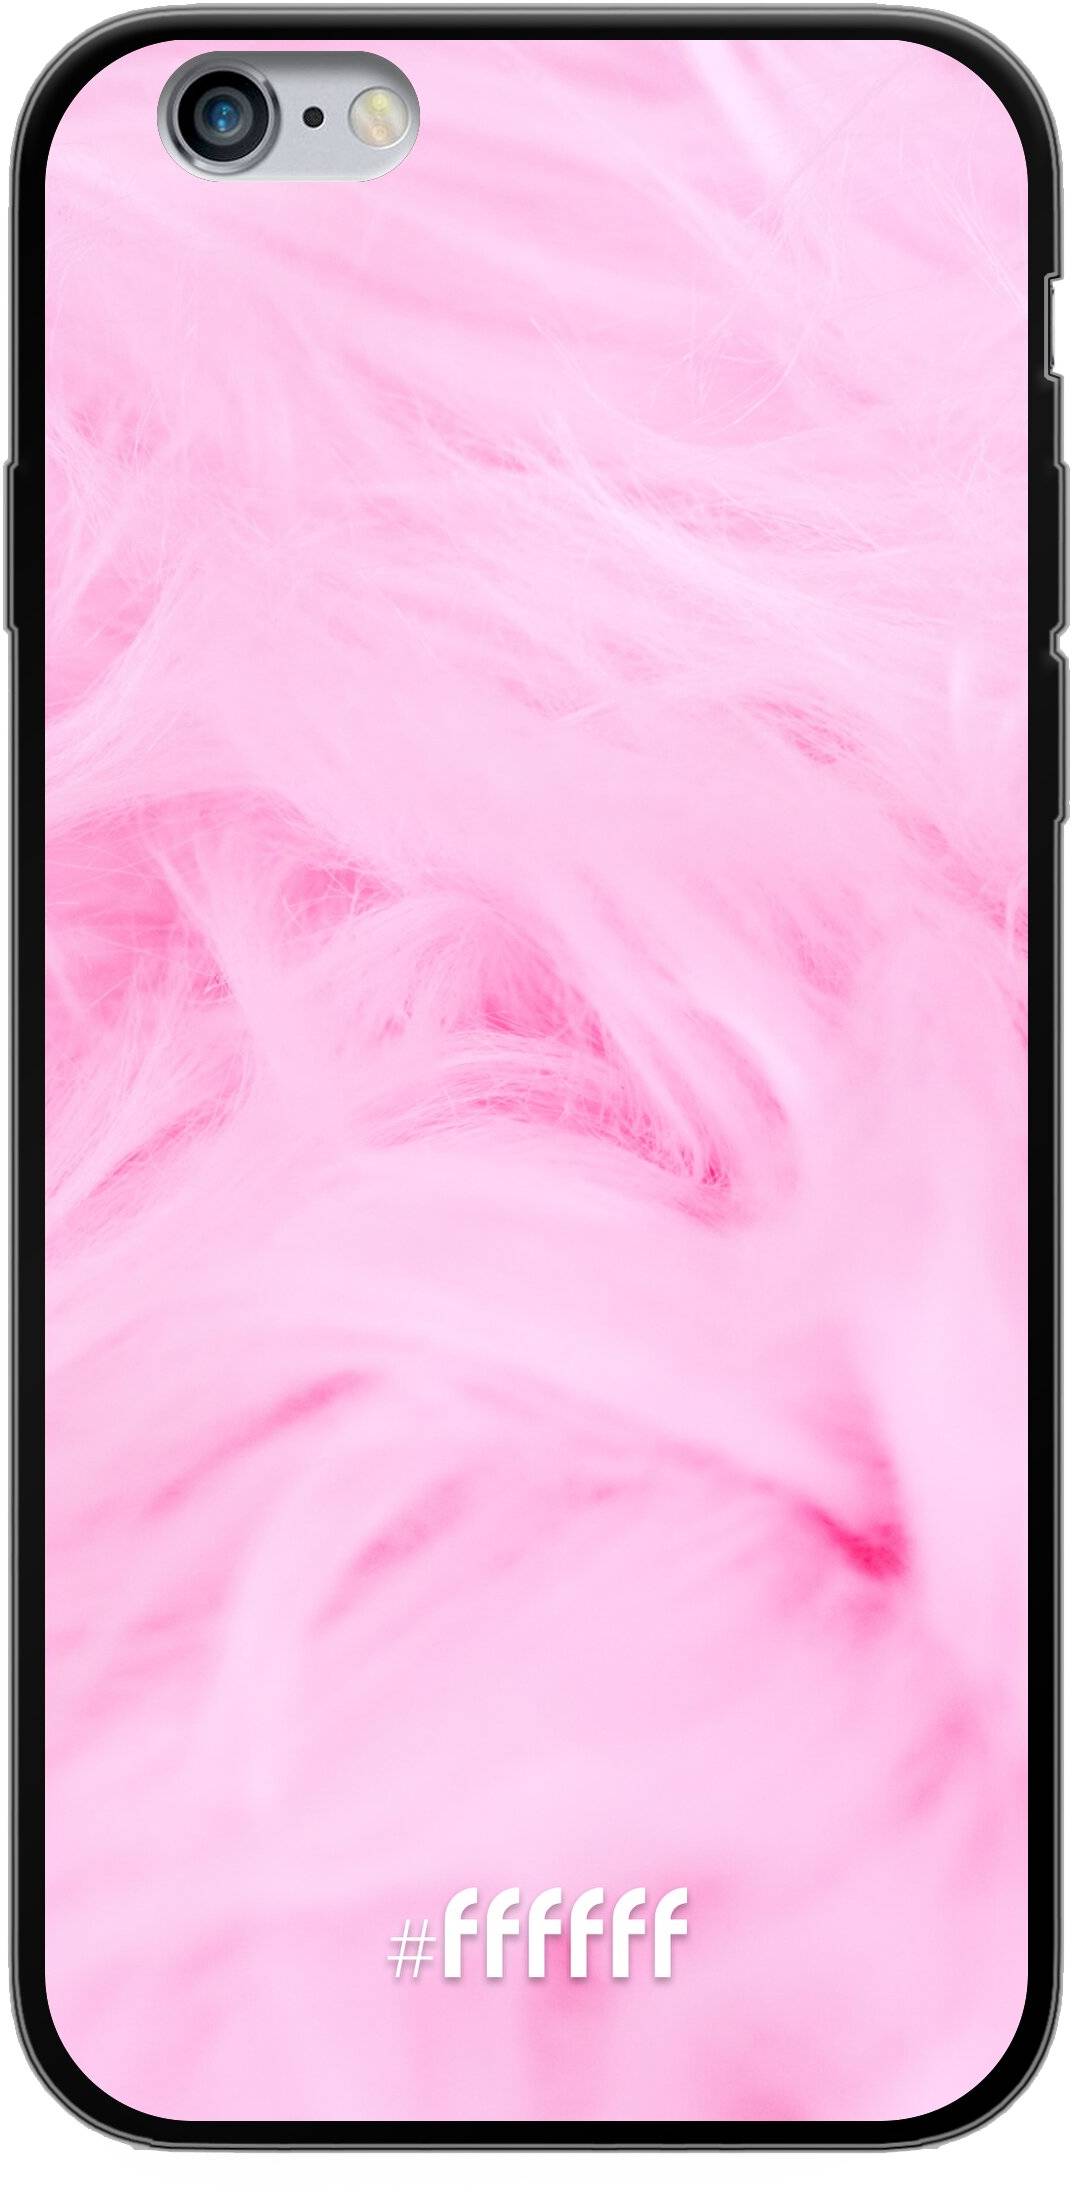 Cotton Candy iPhone 6s